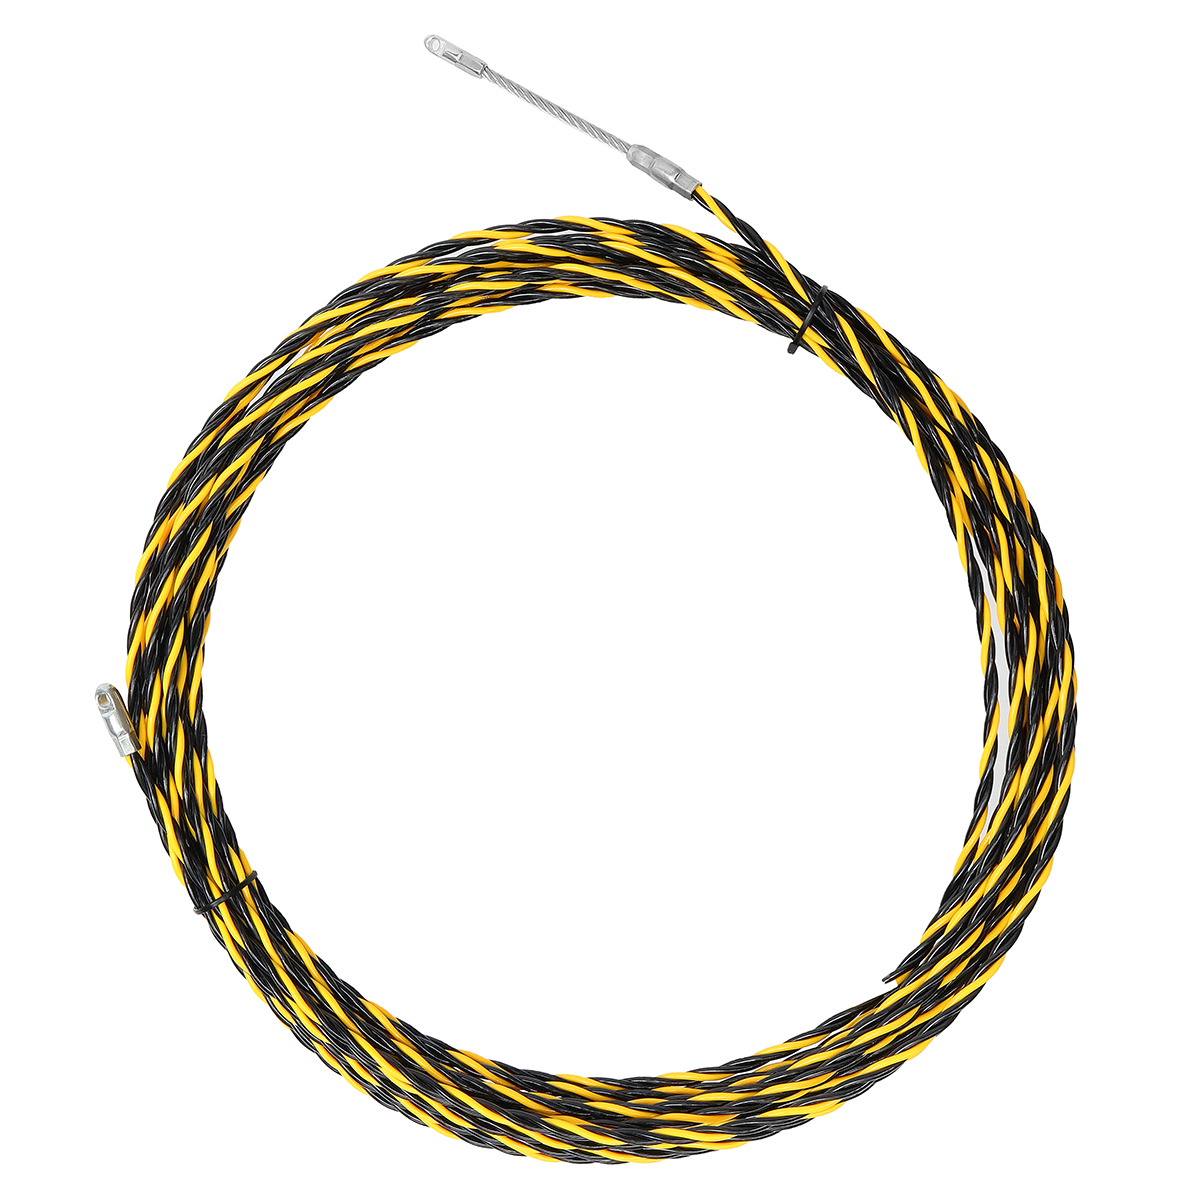 15M-5mm-Spiral-Cable-Puller-Conduit-Snake-Cable-Rodder-Fish-Tape-Wire-Guide-1323138-10